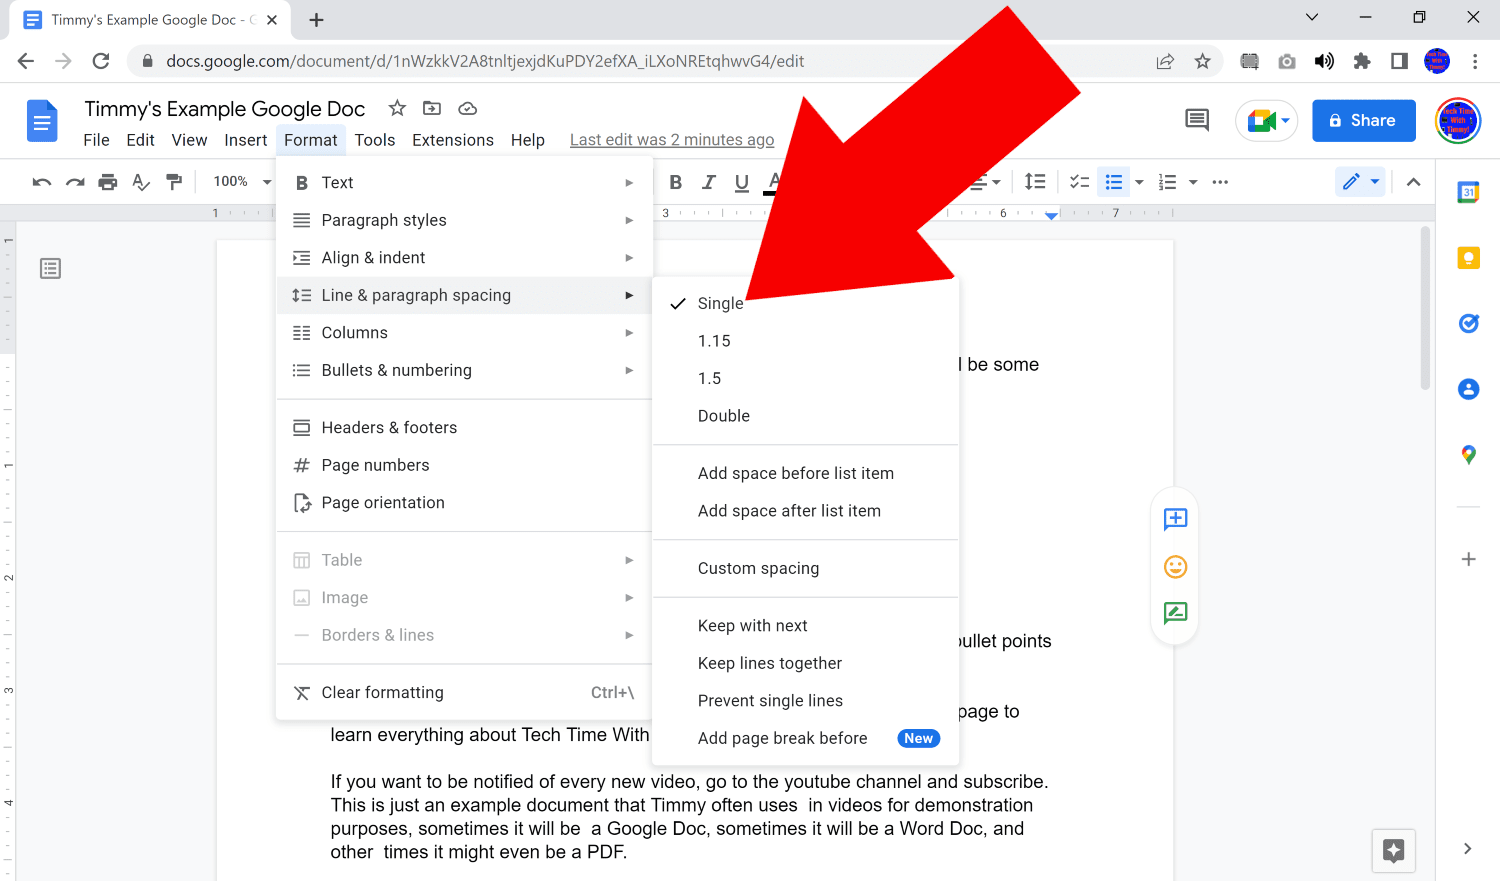 How To Move A Bullet Point Back In Google Docs